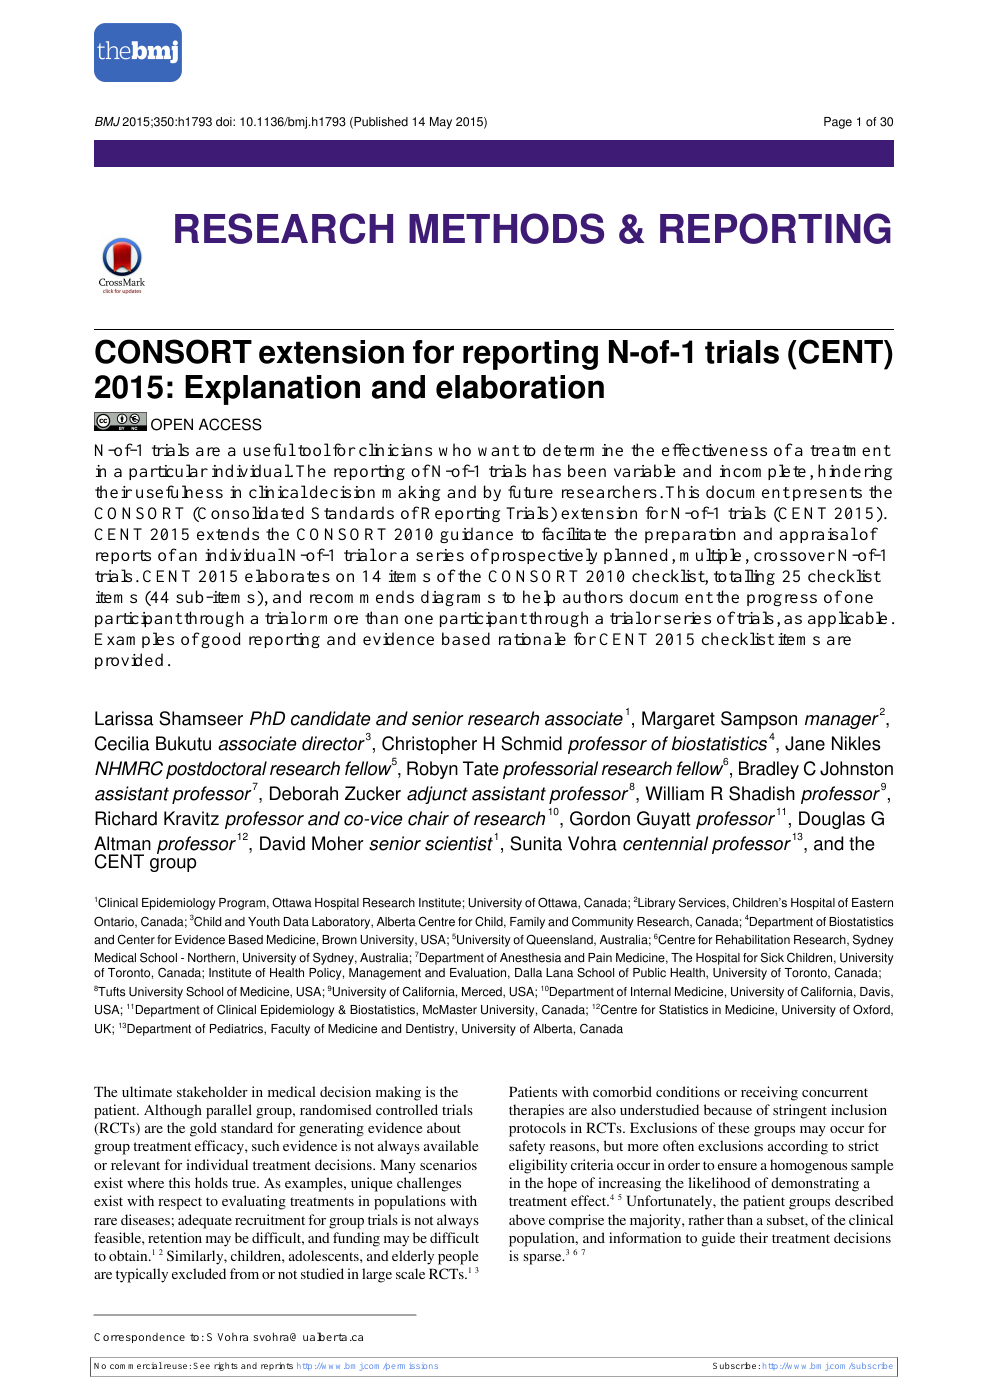 Consort Extension For Reporting N Of 1 Trials Cent 15 Explanation And Elaboration Topic Of Research Paper In Clinical Medicine Download Scholarly Article Pdf And Read For Free On Cyberleninka Open Science Hub